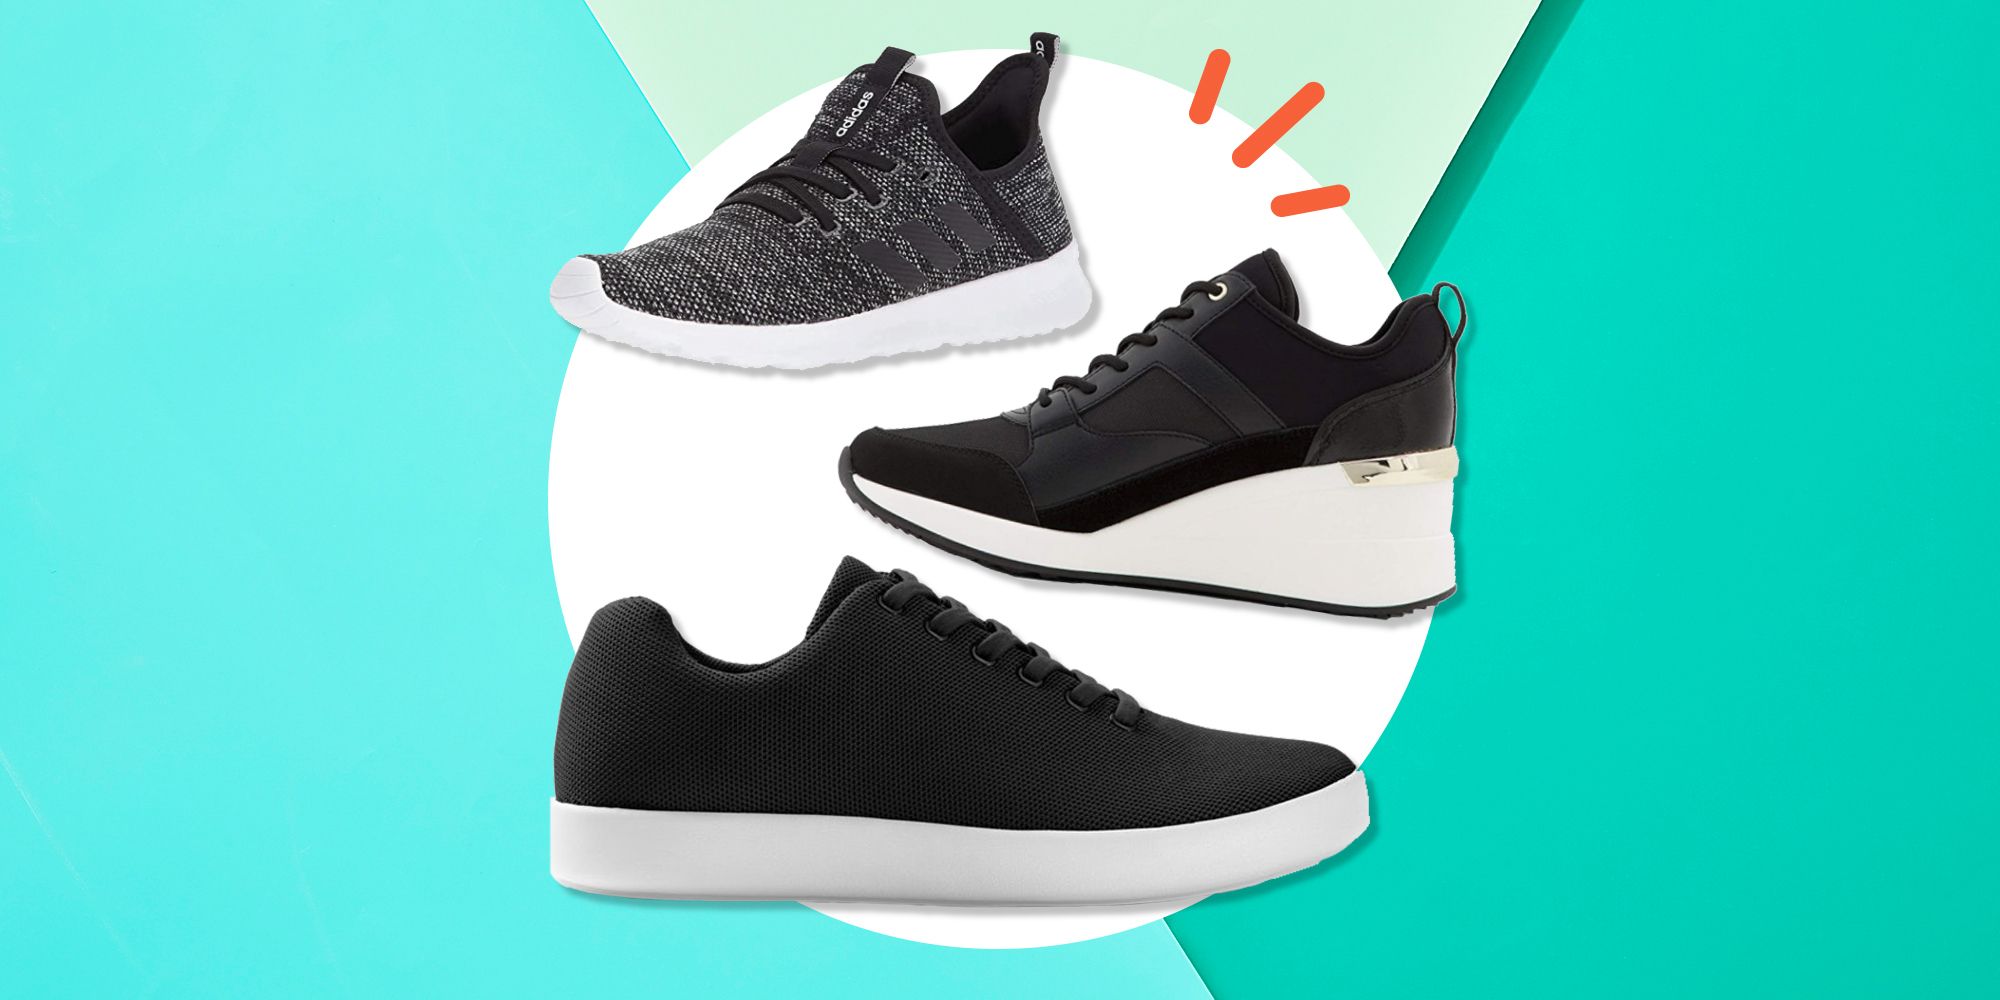 21 Best Black Sneakers For Every Budget, Workout